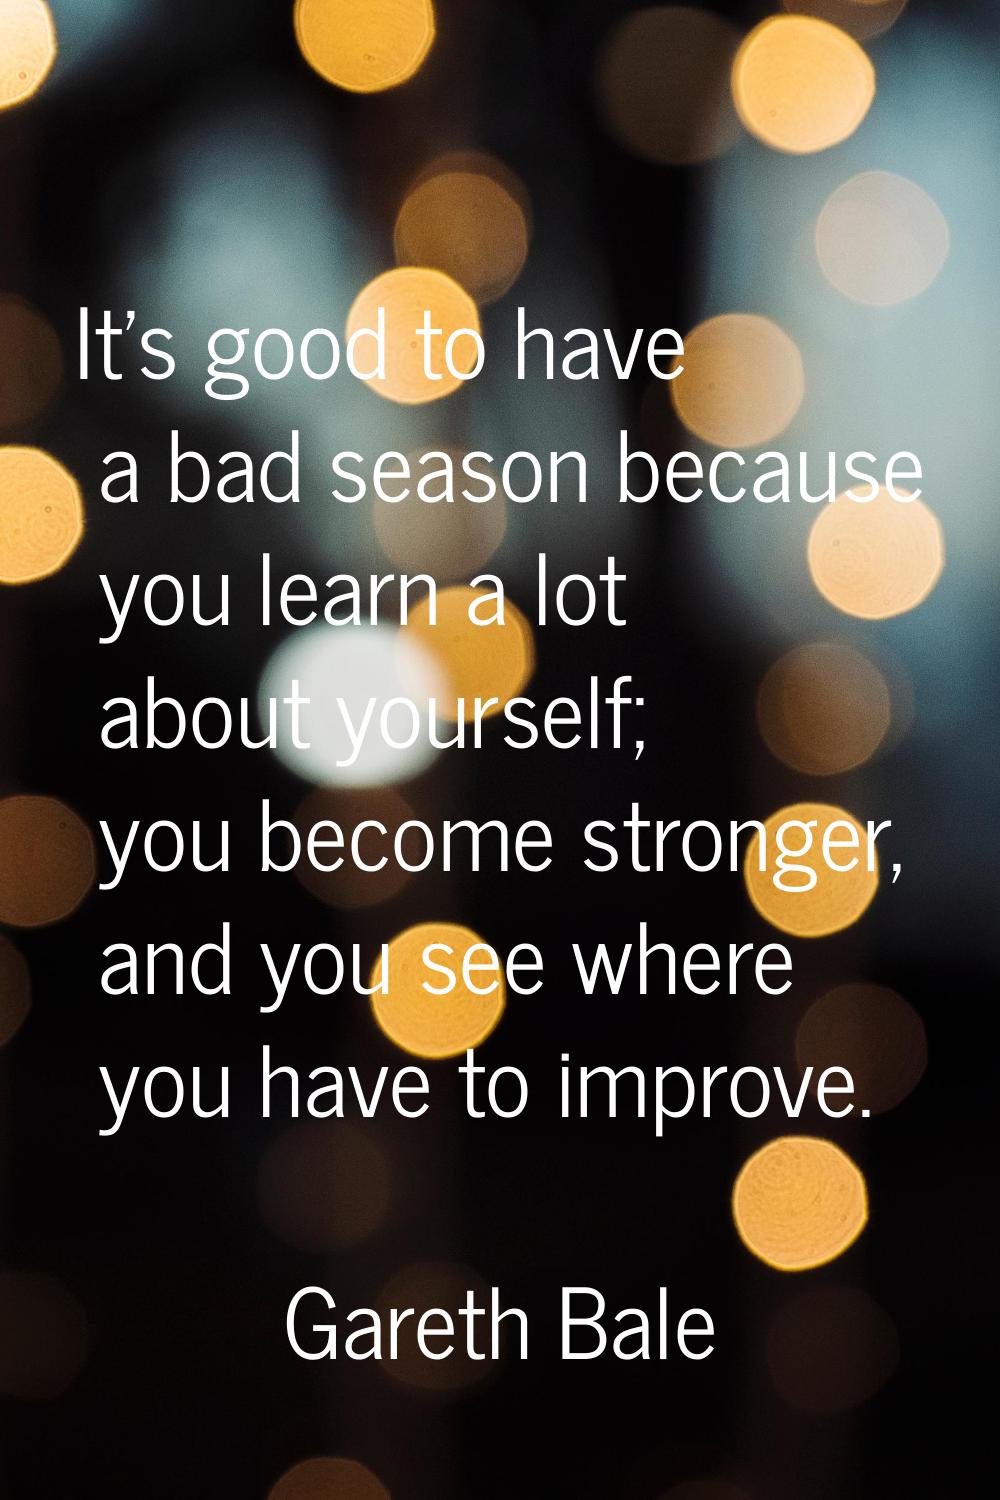 It's good to have a bad season because you learn a lot about yourself; you become stronger, and you